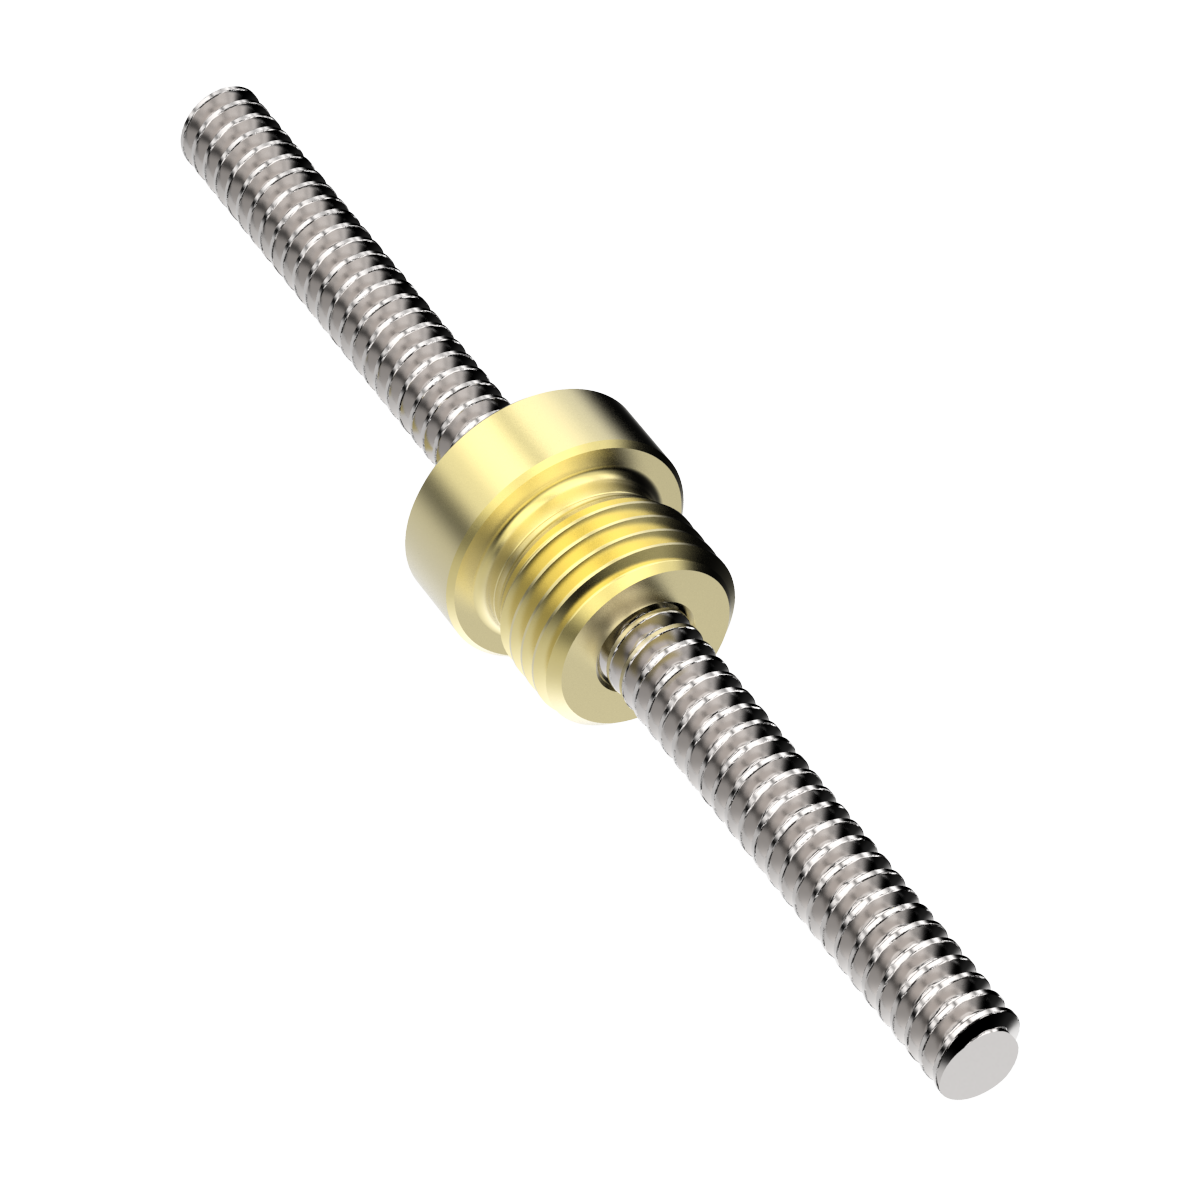 T30 Round Trapezoidal Nut ACME Screw Lead CNC Router Motion Machine Drive T10 